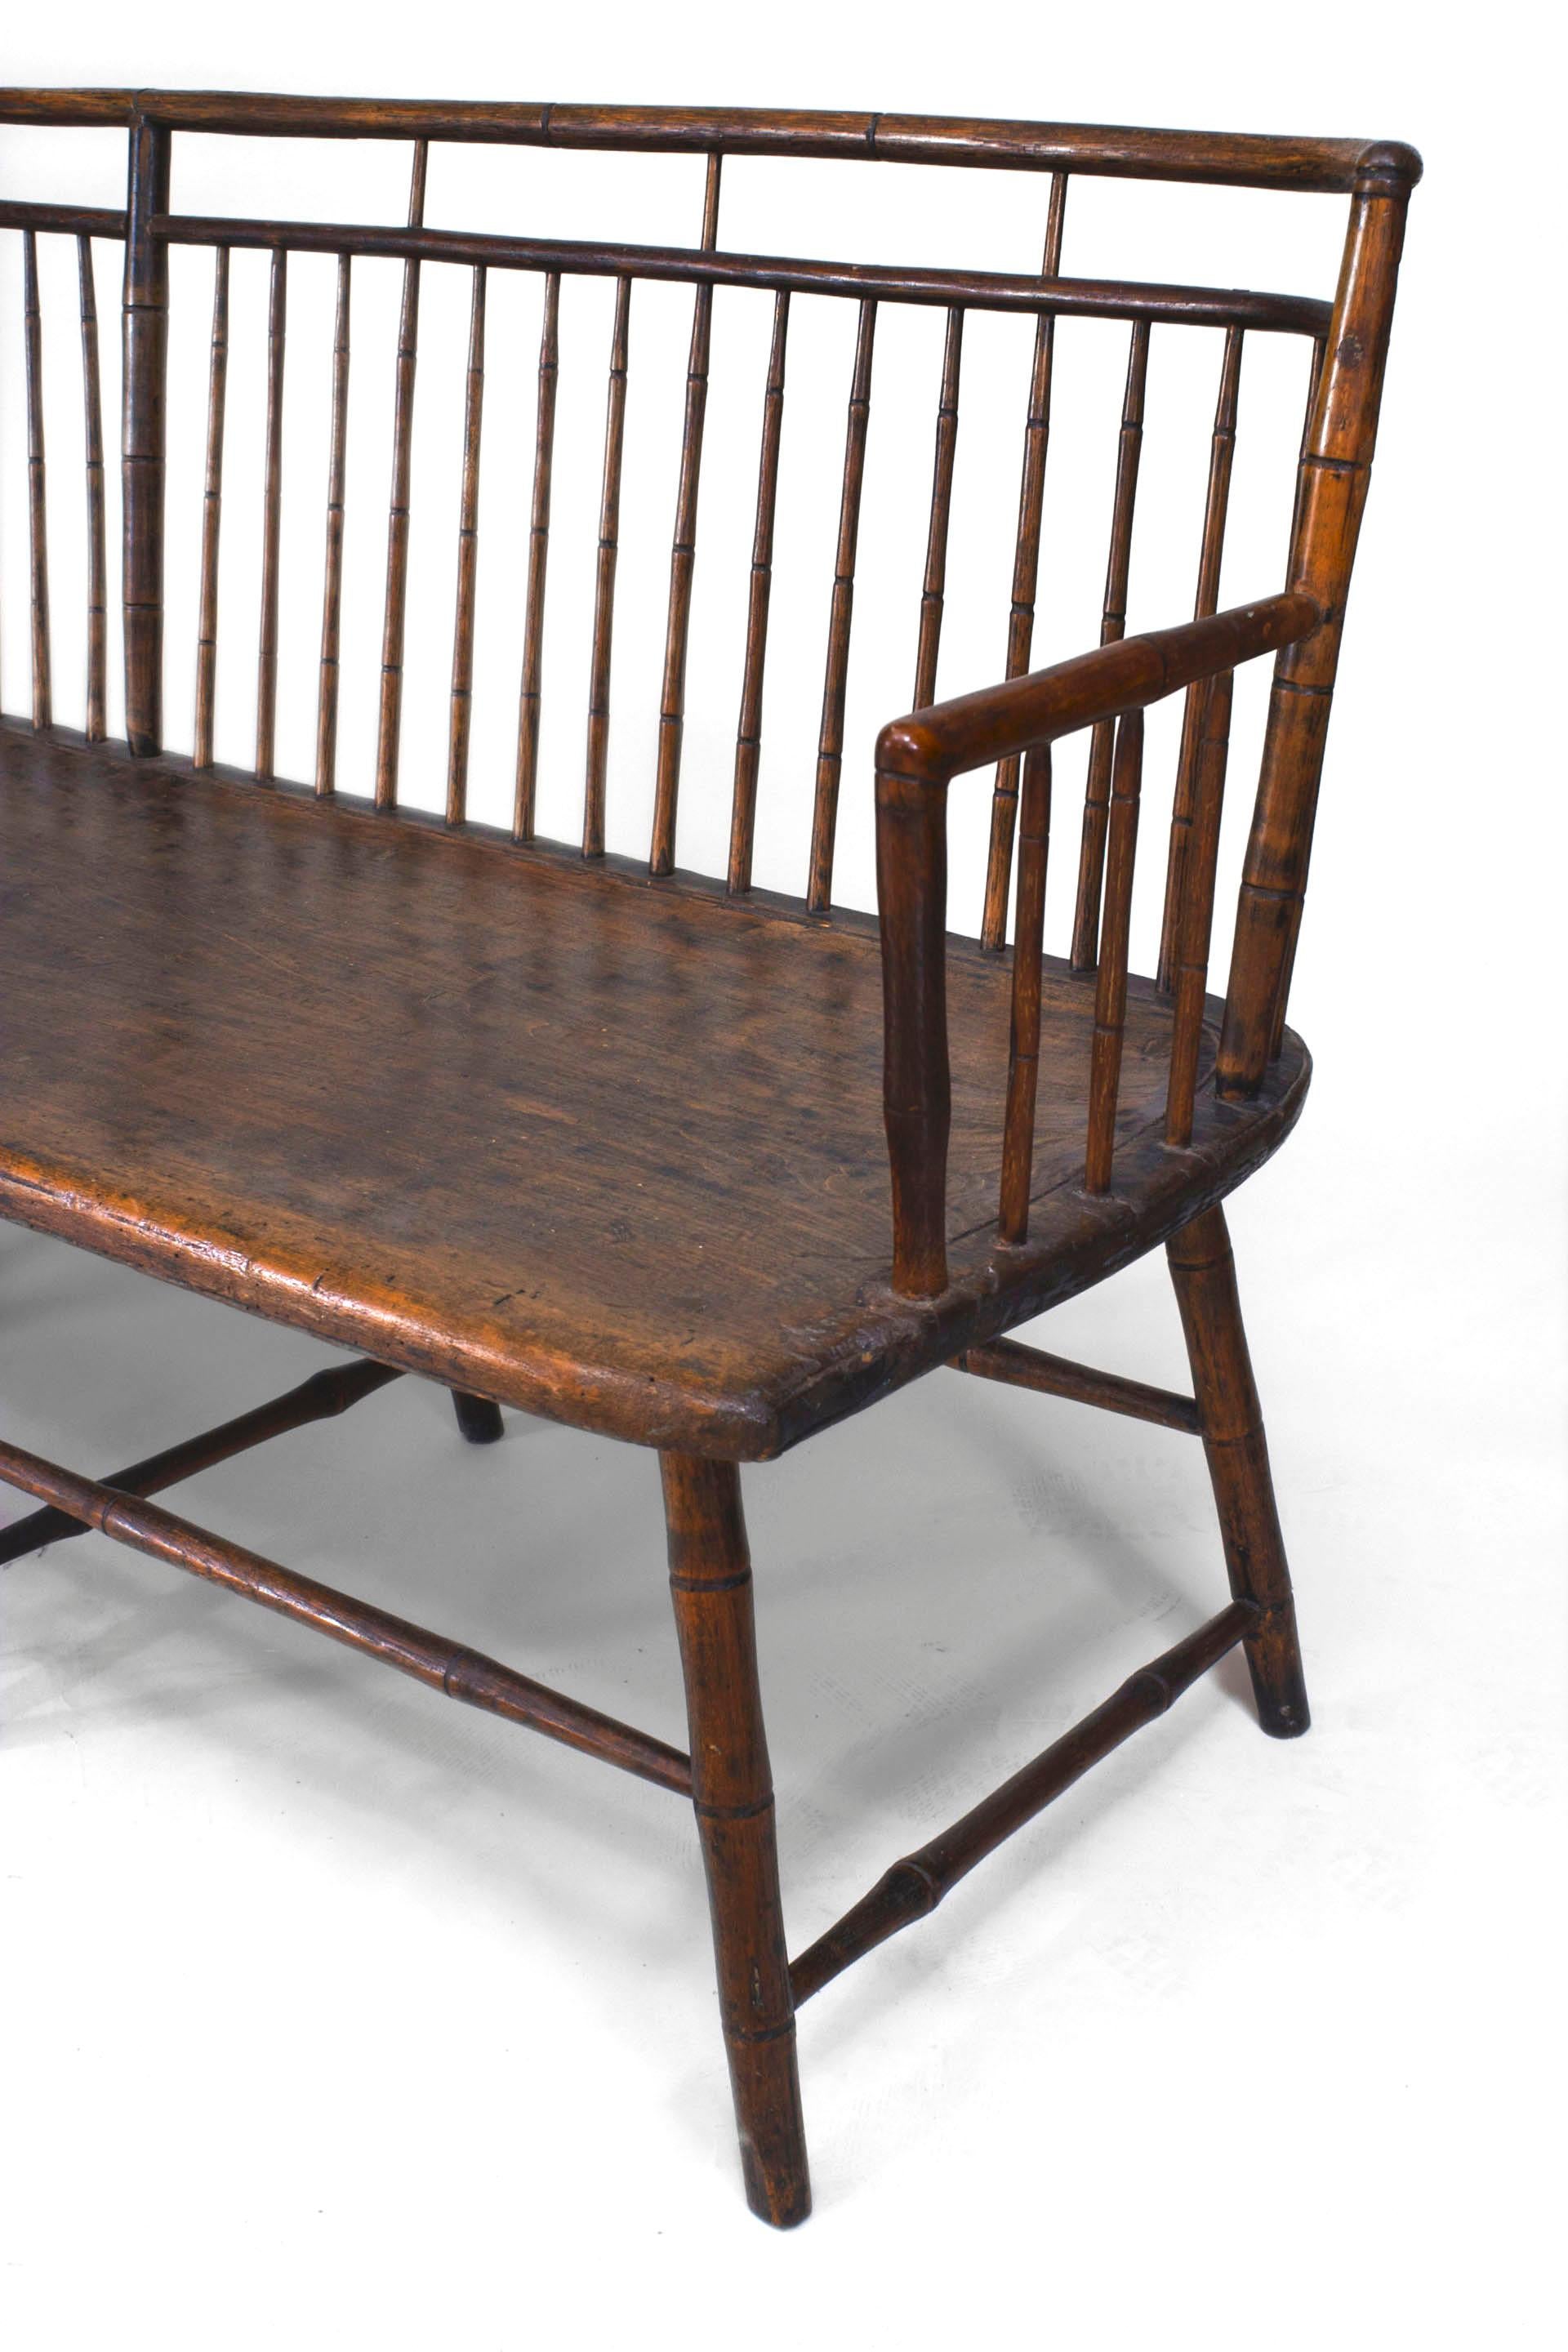 Late 18th-early 19th century American Pennsylvanian pine Windsor style settee with an oak faux bamboo turned spindle back with rounded corners and a birdcage stretcher (originally painted).